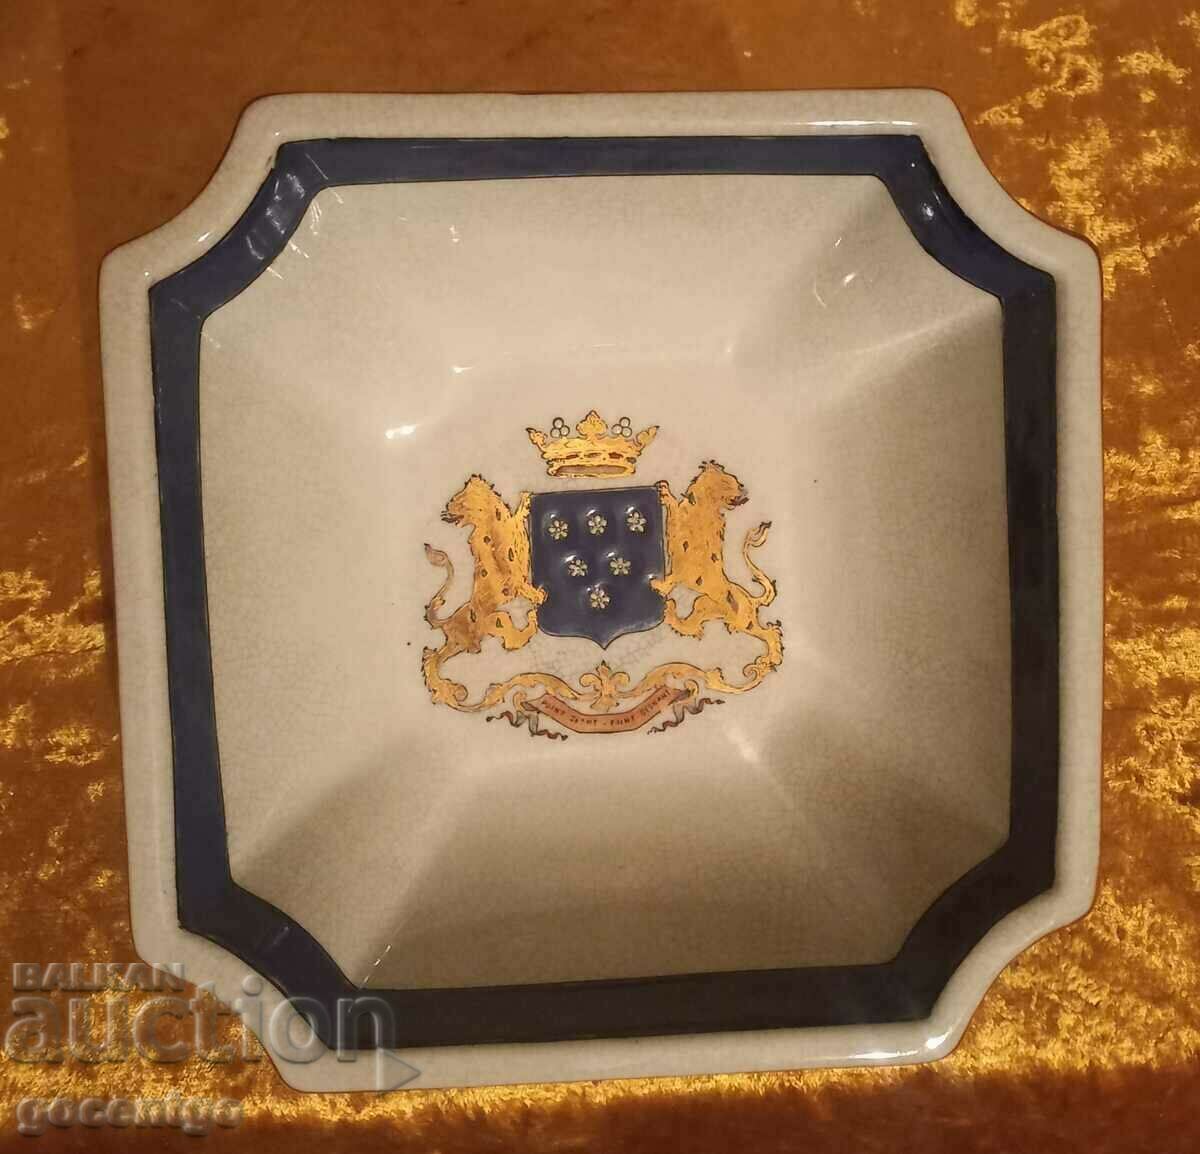 OLD MARKED BOWL WITH FAMILY COAT OF ARMS